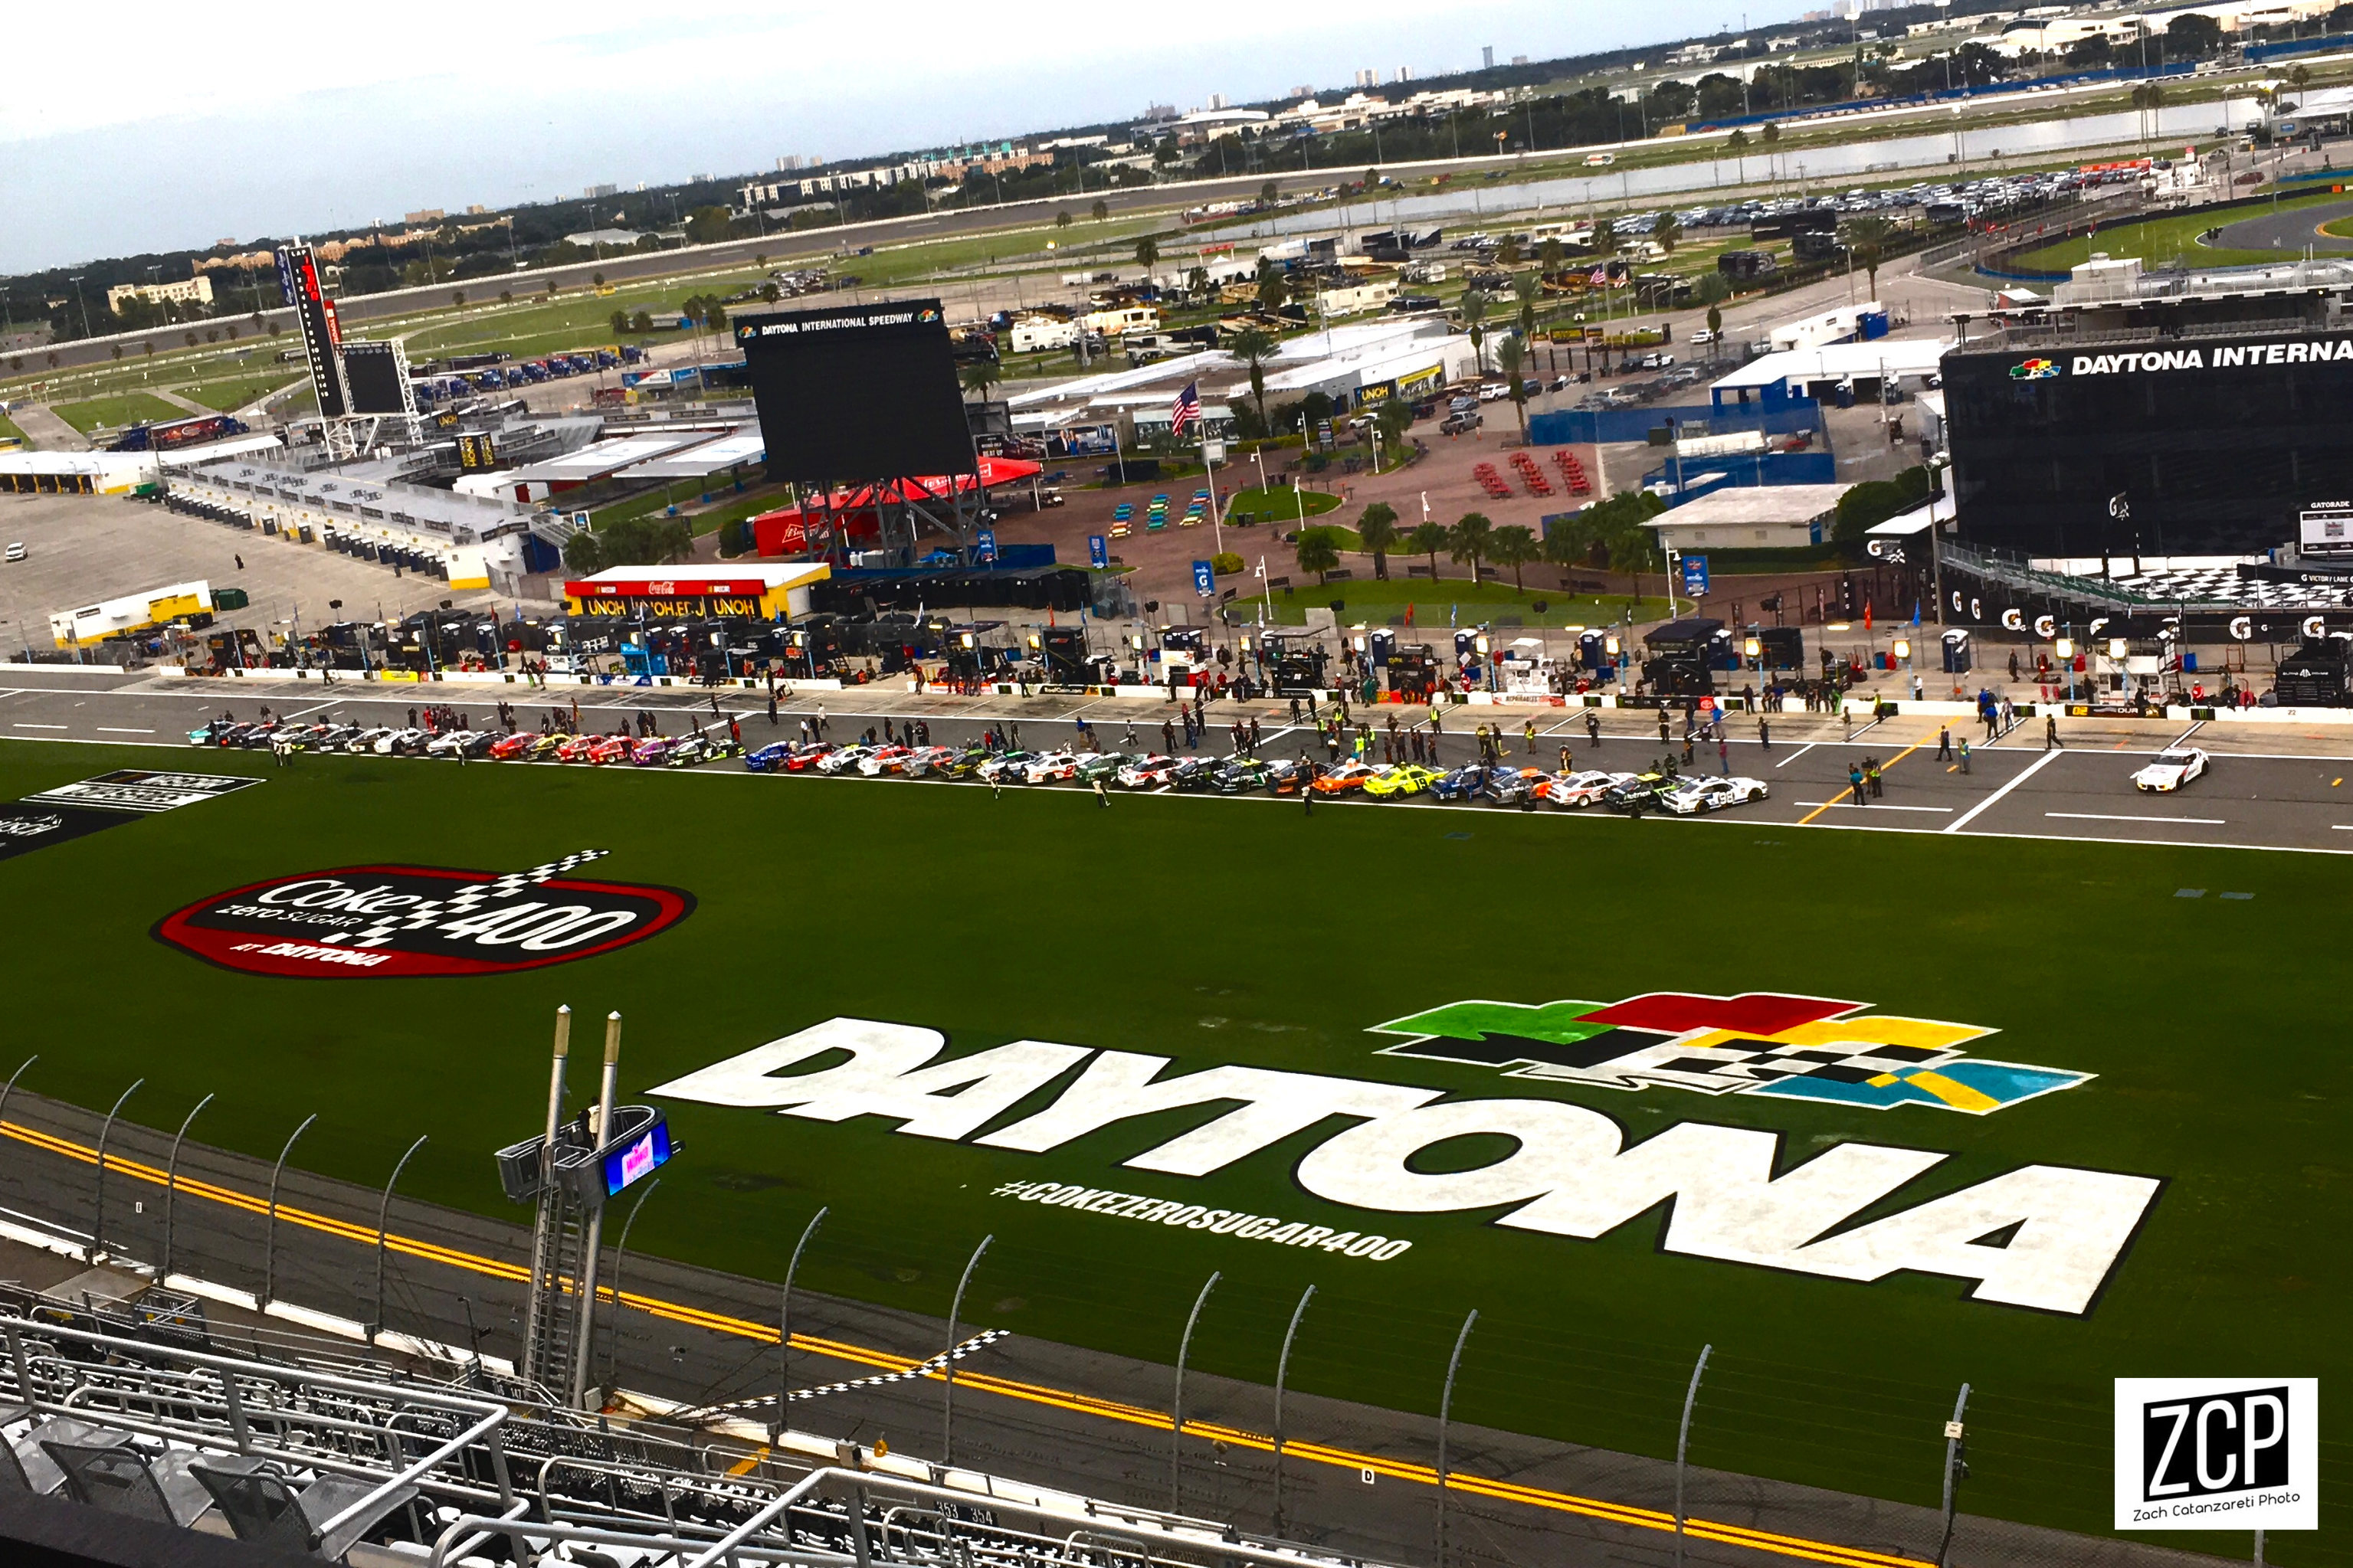 <p>The Daytona 500 is one of the most famous races in the NASCAR Cup Series. It marks the start of the racing season every February, drawing huge crowds to the Daytona International Speedway.</p>